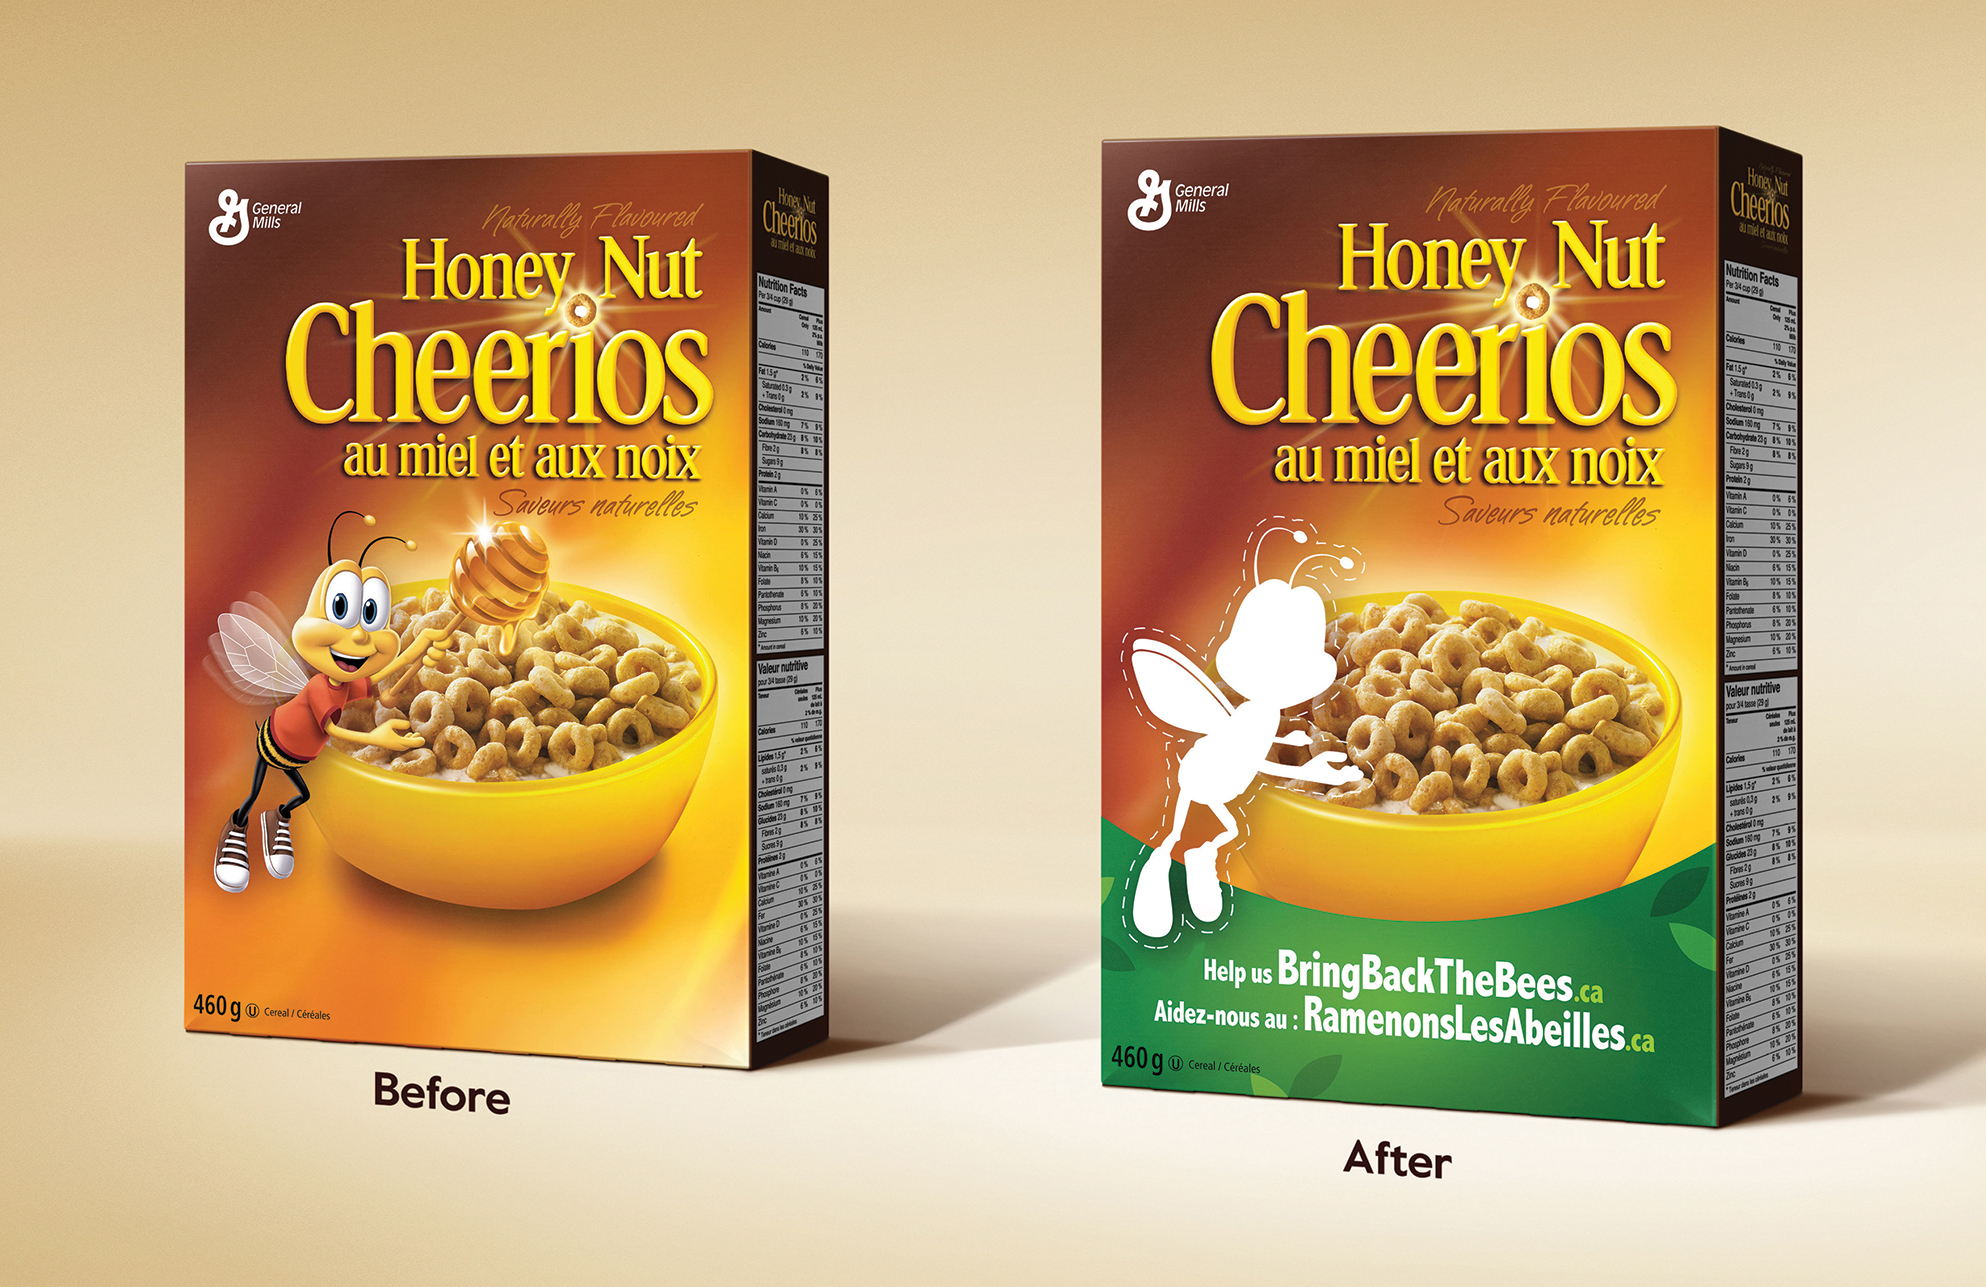 Before and after photos of cereal boxes from Honey Nut Cheerios' 'Bring Back the Bees' campaign